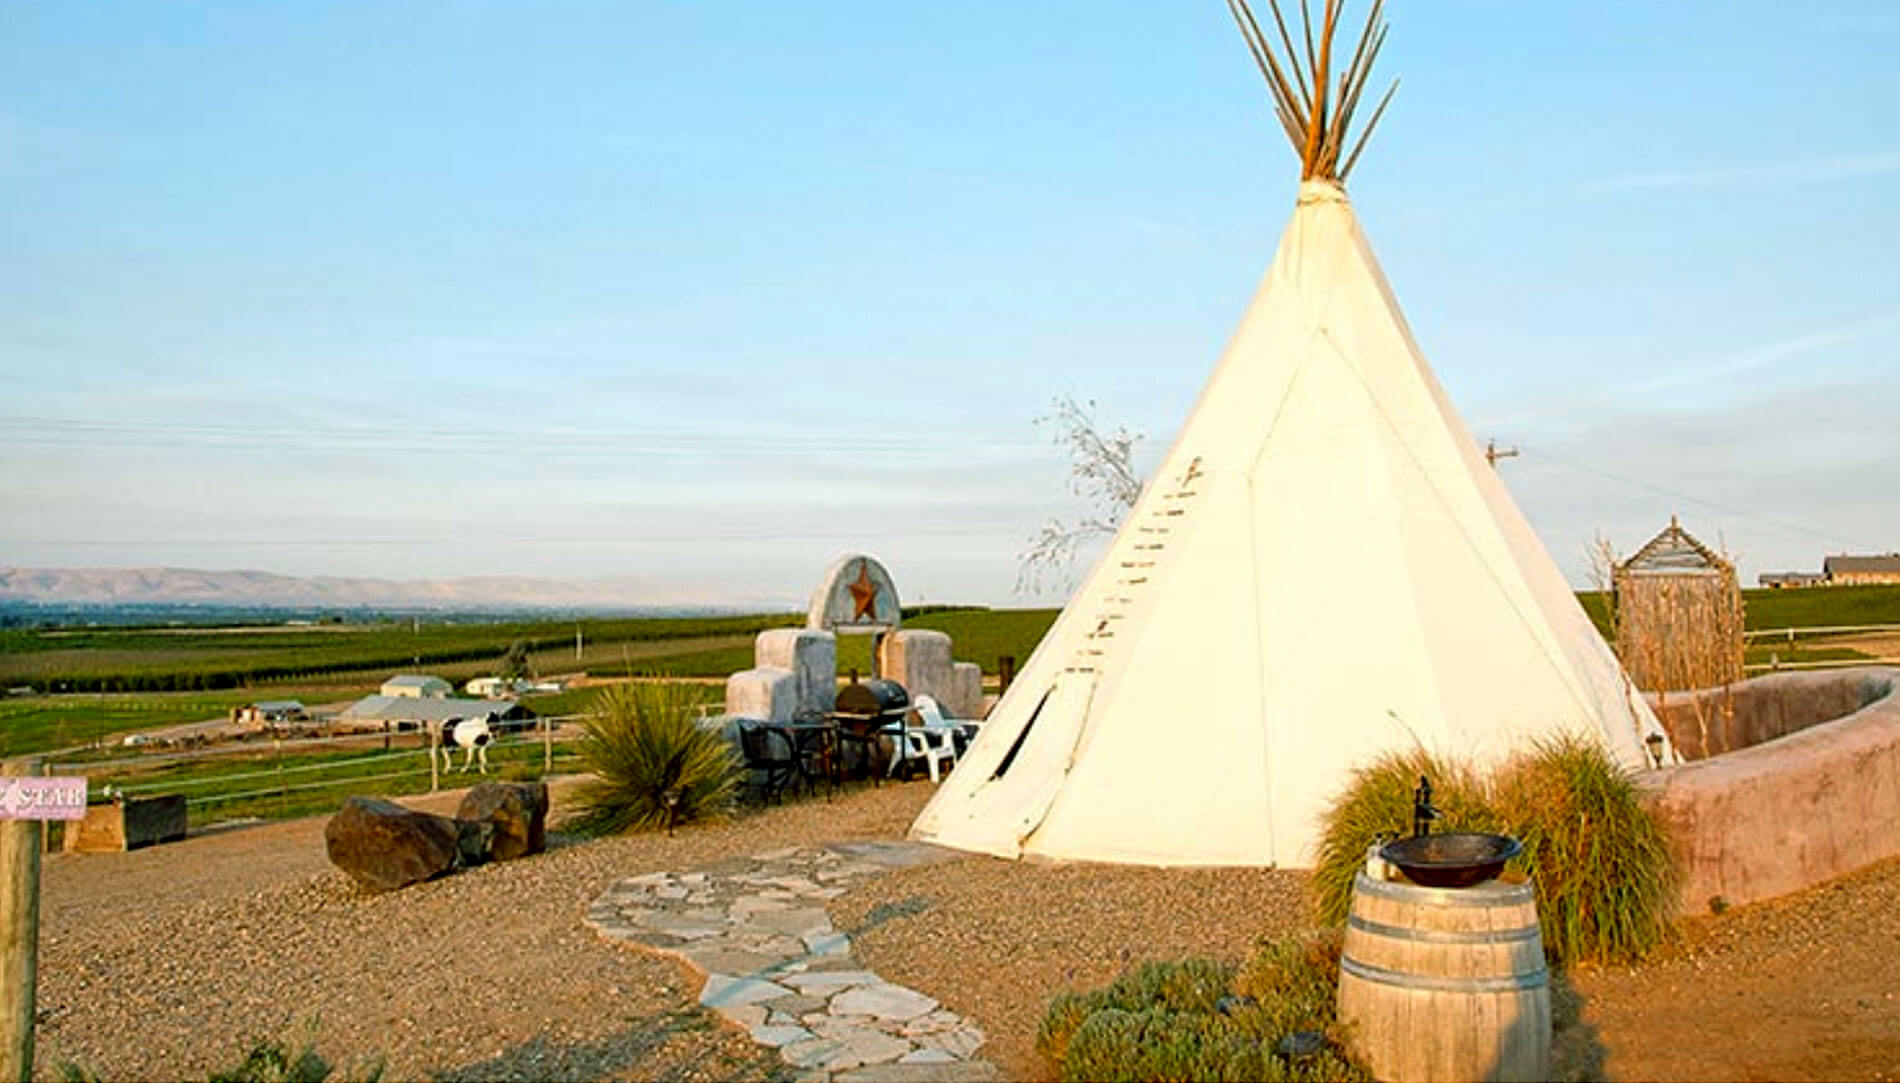 Cherry Wood Teepee The Lone Star teepee at Cherry Wood BB offers vineyard and orchard Yakima Valley